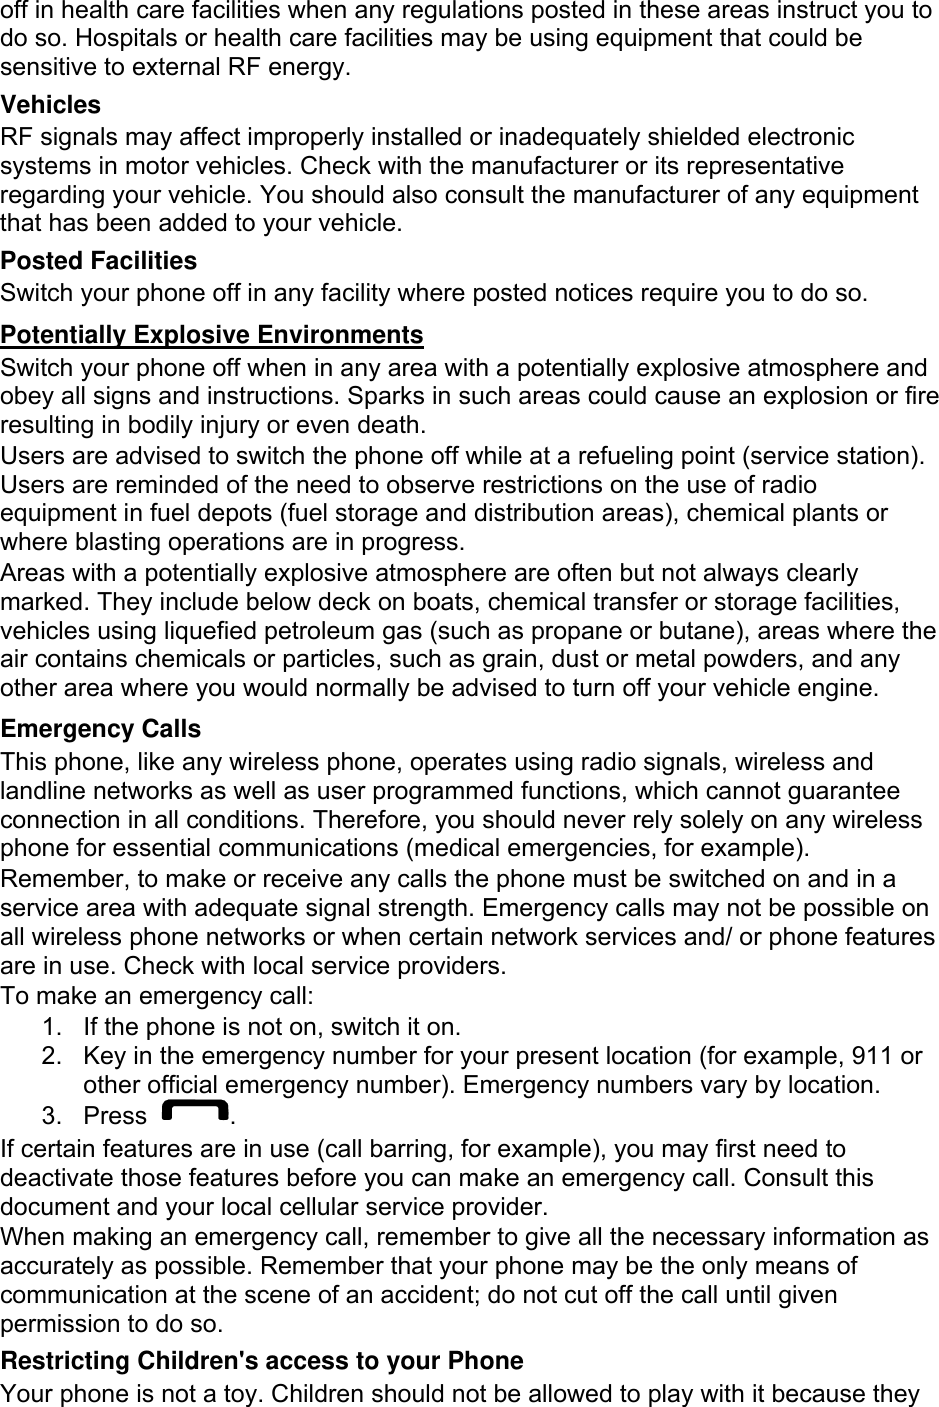 off in health care facilities when any regulations posted in these areas instruct you to do so. Hospitals or health care facilities may be using equipment that could be sensitive to external RF energy. Vehicles RF signals may affect improperly installed or inadequately shielded electronic systems in motor vehicles. Check with the manufacturer or its representative regarding your vehicle. You should also consult the manufacturer of any equipment that has been added to your vehicle. Posted Facilities Switch your phone off in any facility where posted notices require you to do so. Potentially Explosive Environments Switch your phone off when in any area with a potentially explosive atmosphere and obey all signs and instructions. Sparks in such areas could cause an explosion or fire resulting in bodily injury or even death. Users are advised to switch the phone off while at a refueling point (service station). Users are reminded of the need to observe restrictions on the use of radio equipment in fuel depots (fuel storage and distribution areas), chemical plants or where blasting operations are in progress. Areas with a potentially explosive atmosphere are often but not always clearly marked. They include below deck on boats, chemical transfer or storage facilities, vehicles using liquefied petroleum gas (such as propane or butane), areas where the air contains chemicals or particles, such as grain, dust or metal powders, and any other area where you would normally be advised to turn off your vehicle engine. Emergency Calls This phone, like any wireless phone, operates using radio signals, wireless and landline networks as well as user programmed functions, which cannot guarantee connection in all conditions. Therefore, you should never rely solely on any wireless phone for essential communications (medical emergencies, for example). Remember, to make or receive any calls the phone must be switched on and in a service area with adequate signal strength. Emergency calls may not be possible on all wireless phone networks or when certain network services and/ or phone features are in use. Check with local service providers. To make an emergency call: 1.  If the phone is not on, switch it on. 2.  Key in the emergency number for your present location (for example, 911 or other official emergency number). Emergency numbers vary by location. 3. Press  . If certain features are in use (call barring, for example), you may first need to deactivate those features before you can make an emergency call. Consult this document and your local cellular service provider. When making an emergency call, remember to give all the necessary information as accurately as possible. Remember that your phone may be the only means of communication at the scene of an accident; do not cut off the call until given permission to do so. Restricting Children&apos;s access to your Phone Your phone is not a toy. Children should not be allowed to play with it because they 